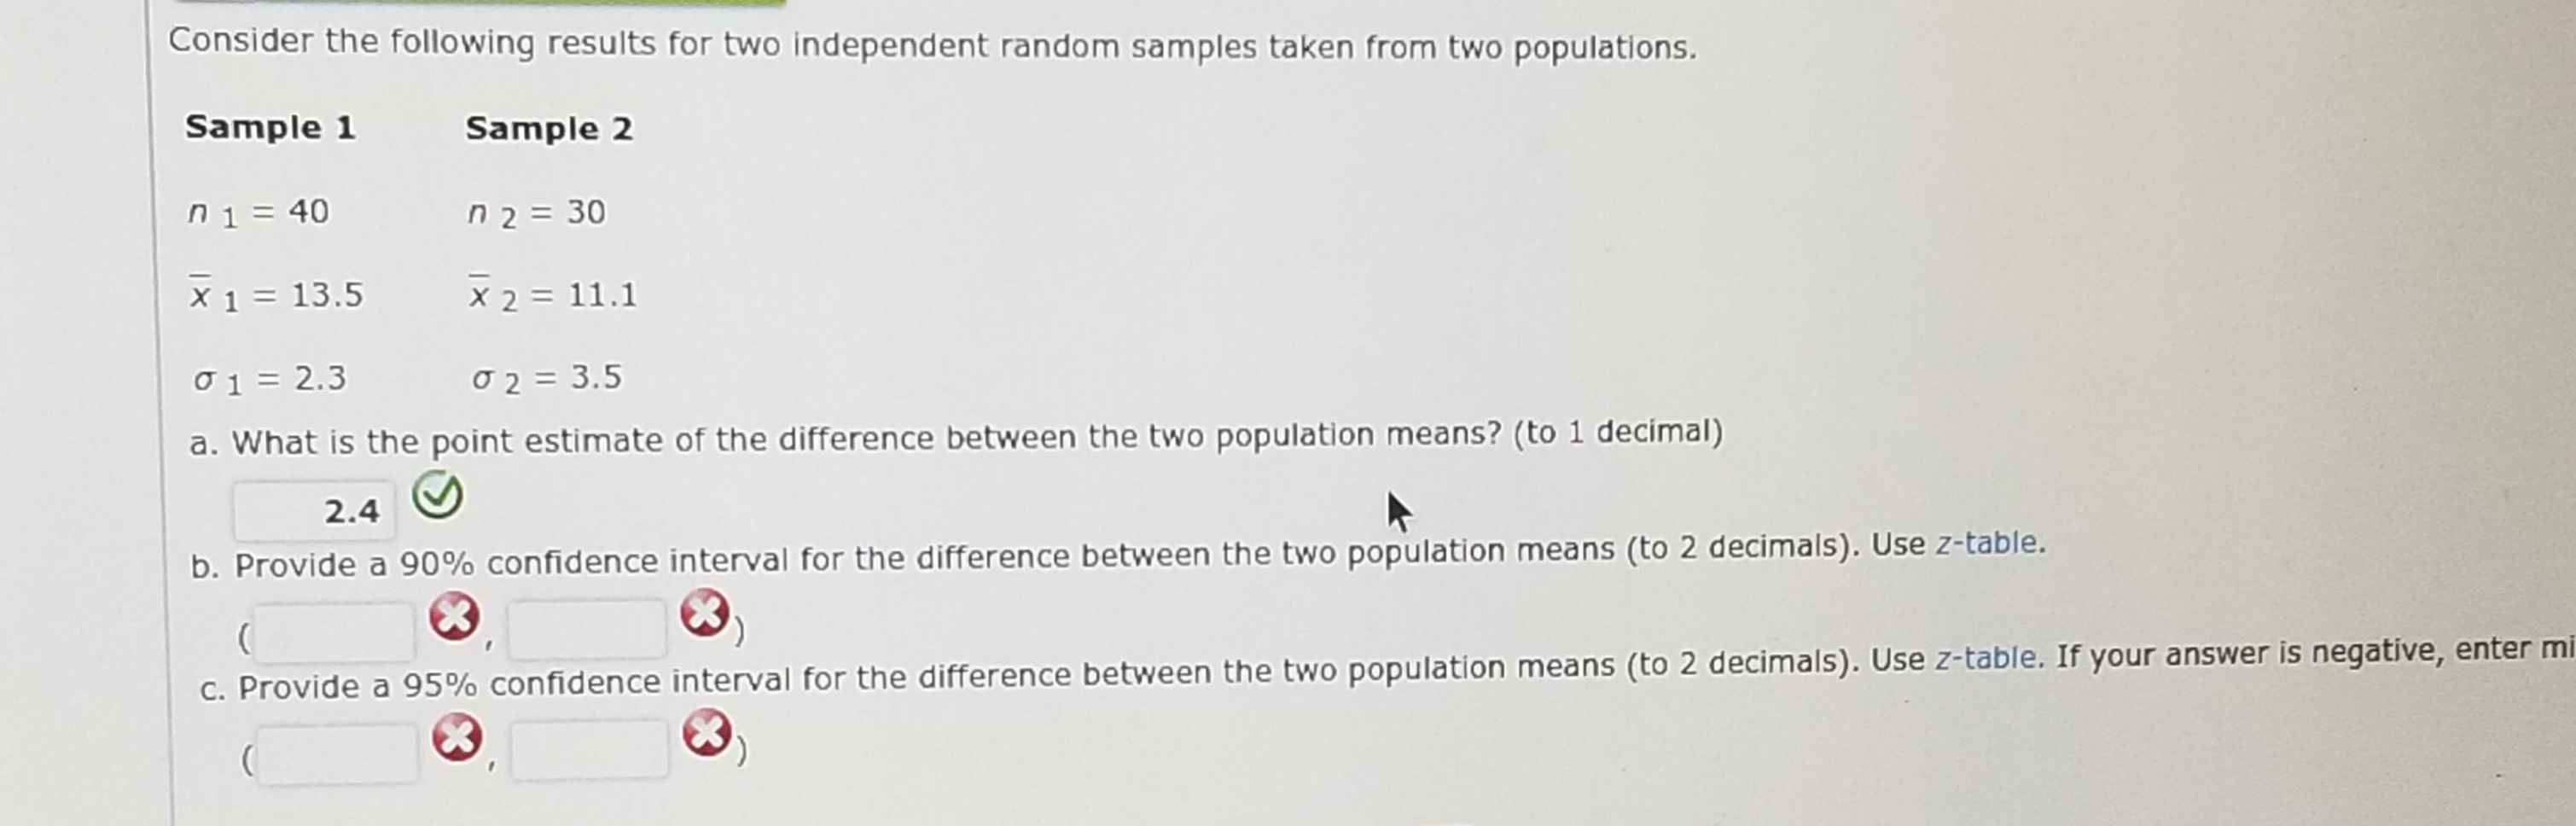 Consider the following results for two independent random samples taken from two populations.
Sample 1 Sample 2
n 140
2 30
x1 13.5 X2 11.1
01-2.3
a. What is the point estimate of the difference between the two population means? (to 1 decimal)
σ 2-3.5
2.4
b. Provide a 90% confidence interval for the difference between the two population means (to 2 decimals). Use z-table.
C. Provide a 95% confidence interval for the difference between the two population means (to 2 decimal
s). Use z-table. If your answer is negative, enter mi
